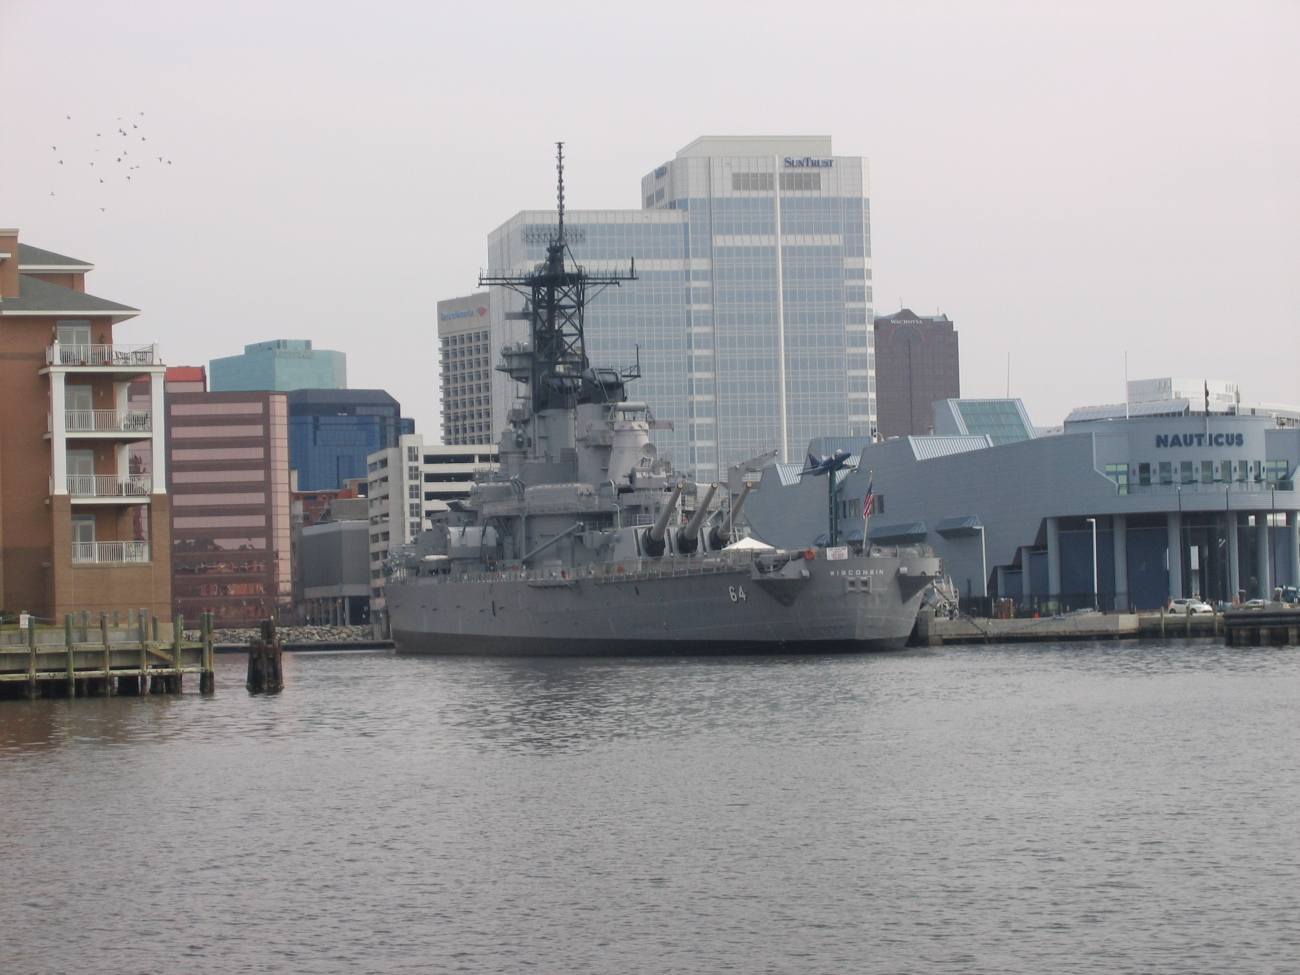 The battleship WISCONSIN tied up next to Nauticus on the Norfolkwaterfront